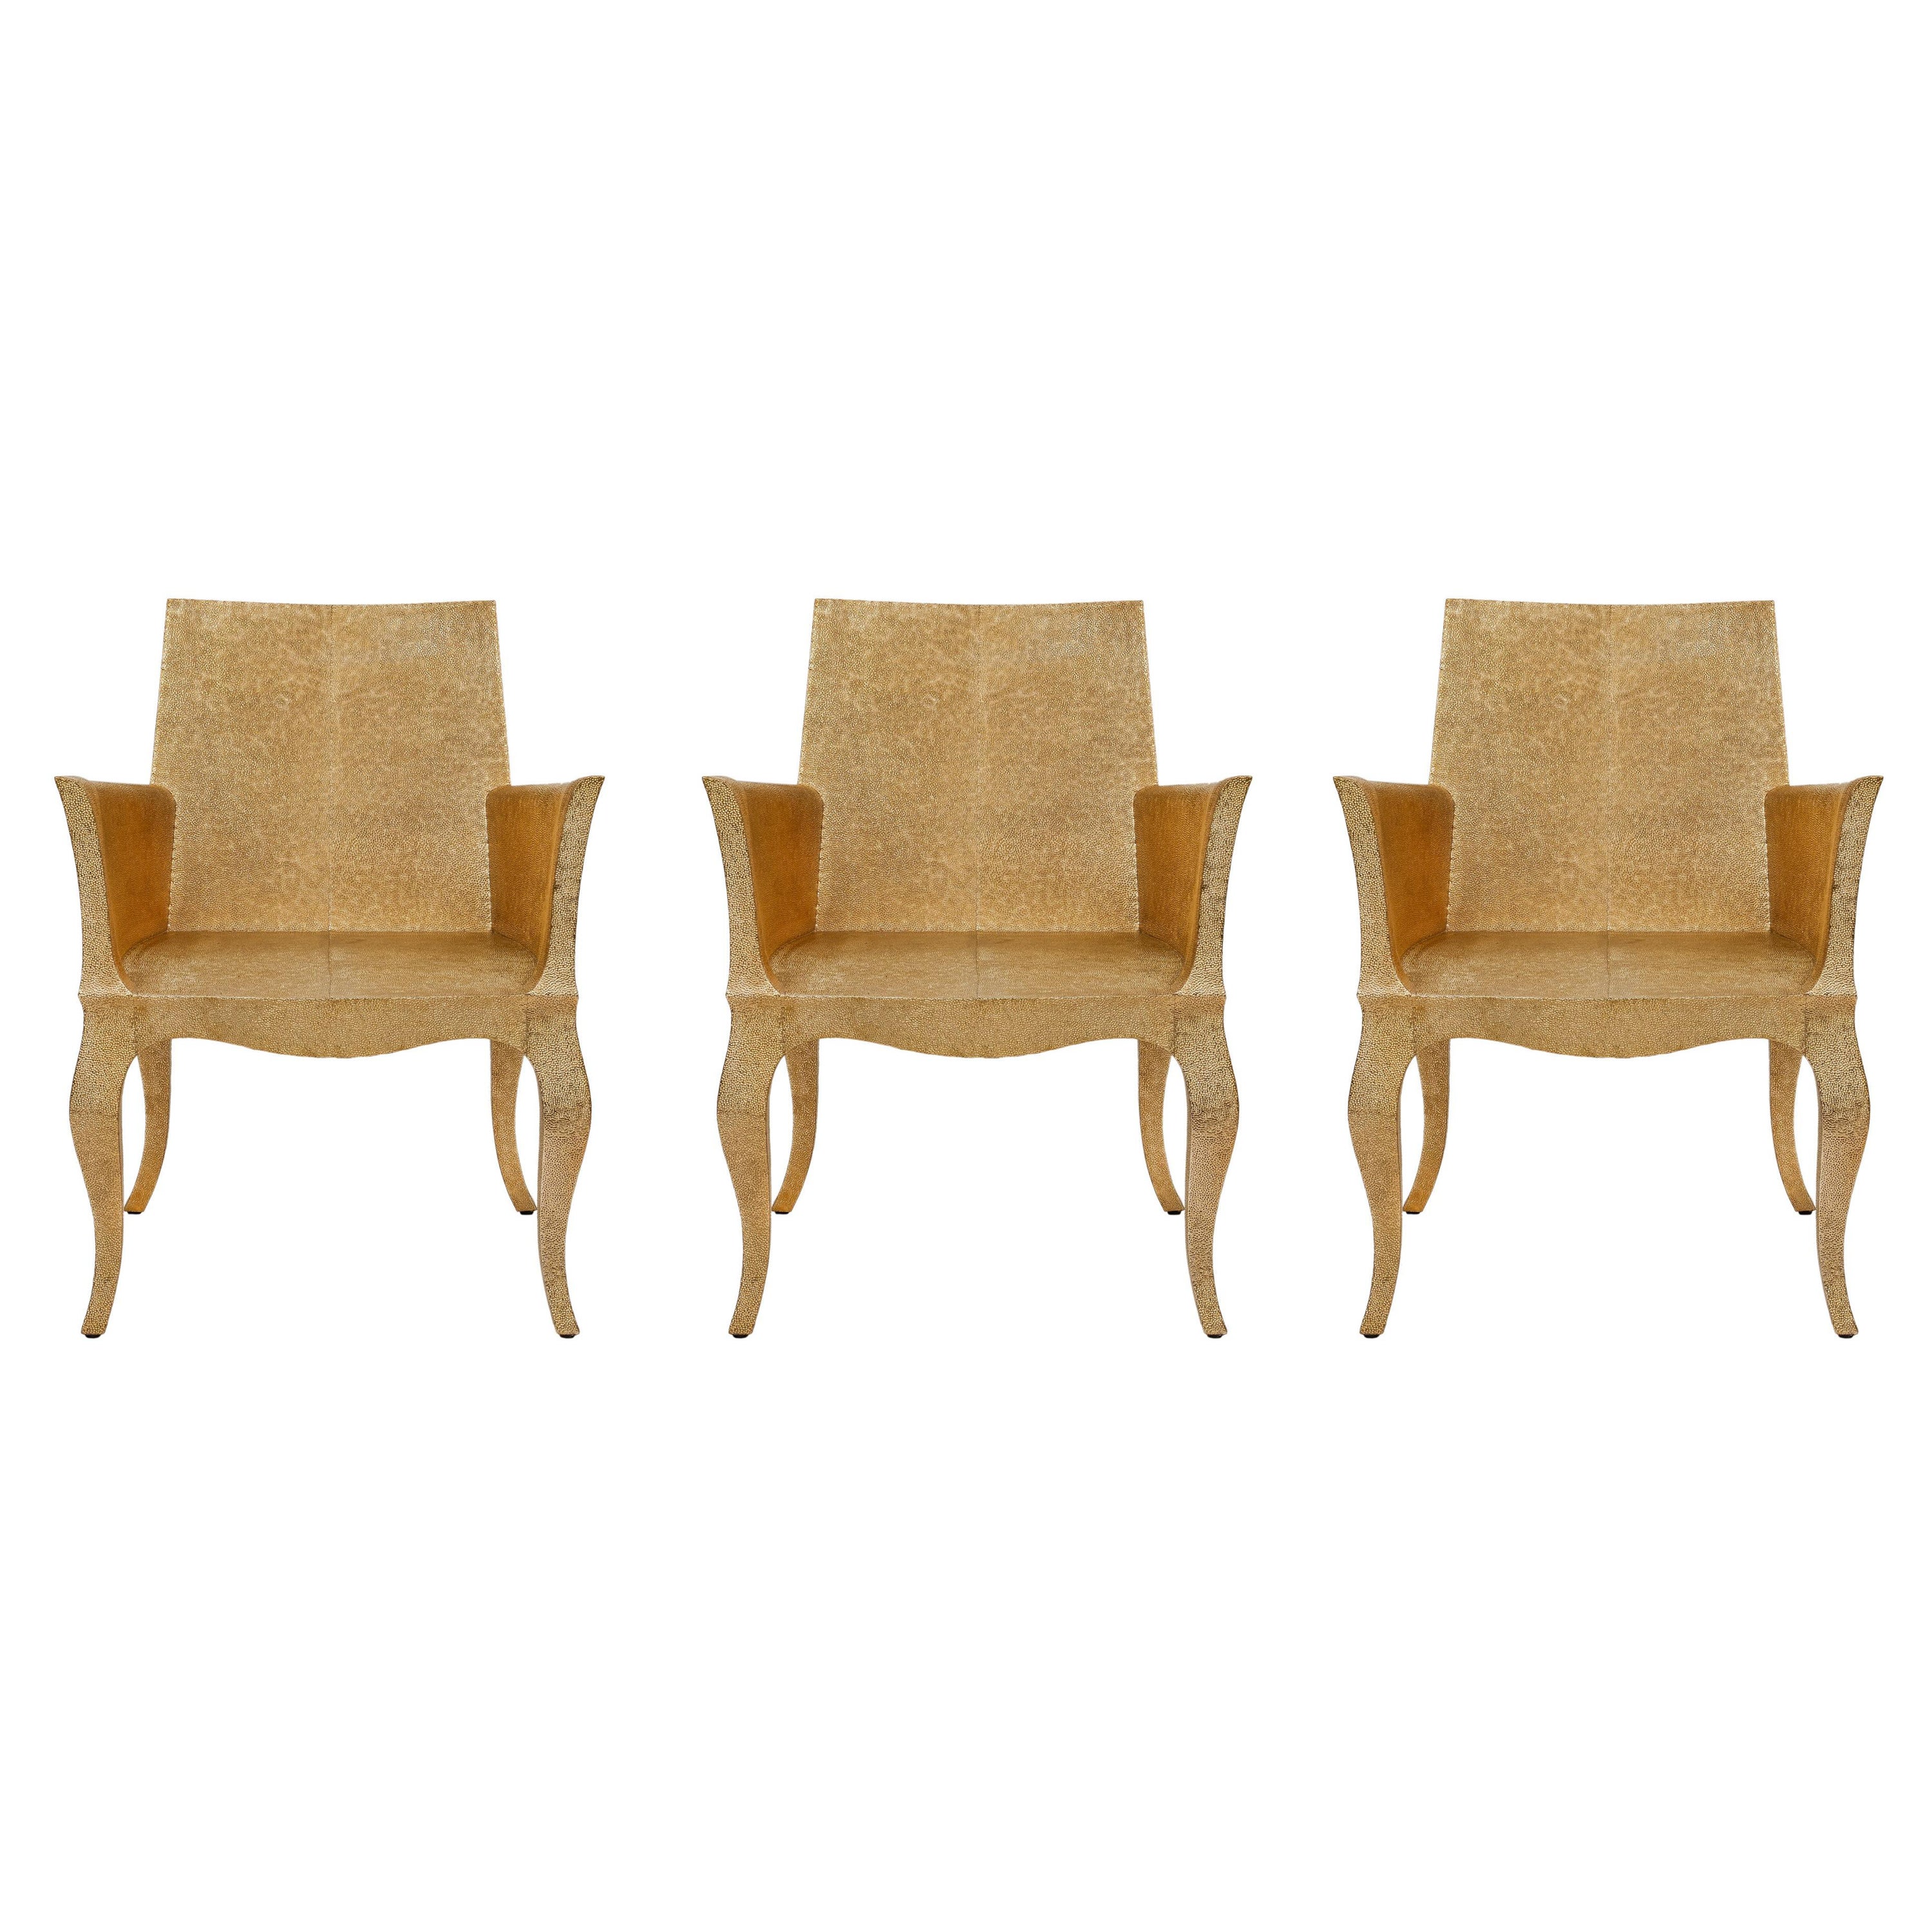 Set of Three Louise Club Chairs in Medium Hammered Brass Over Wood by P. Mathieu For Sale